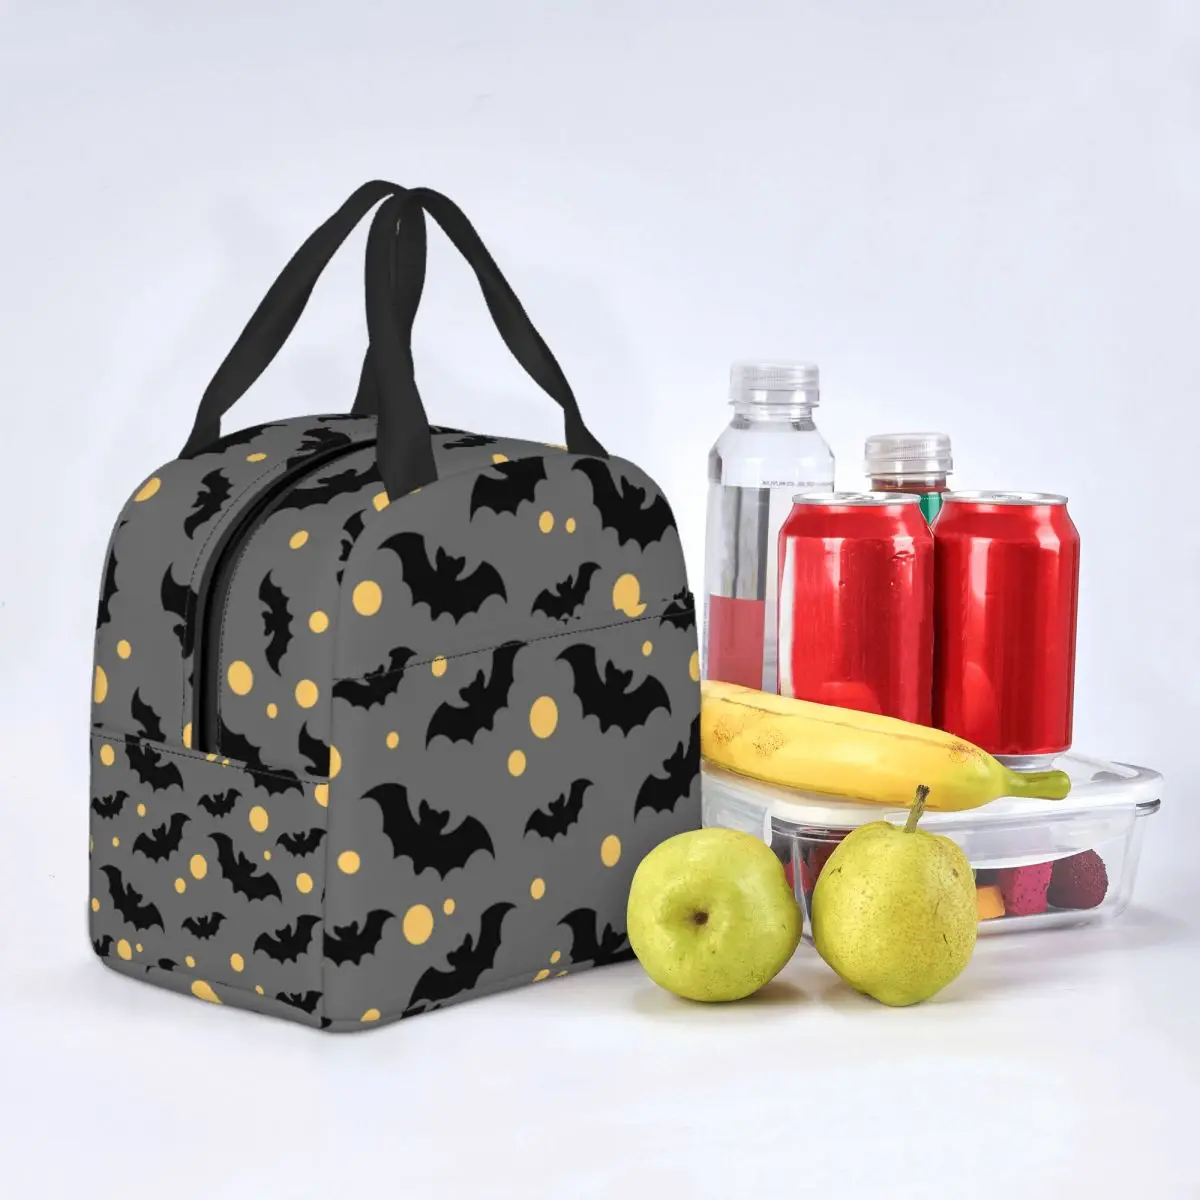 Lunch Bags for Women Kids Black Bats Yellow Moons Thermal Cooler Portable School Canvas Tote Handbags